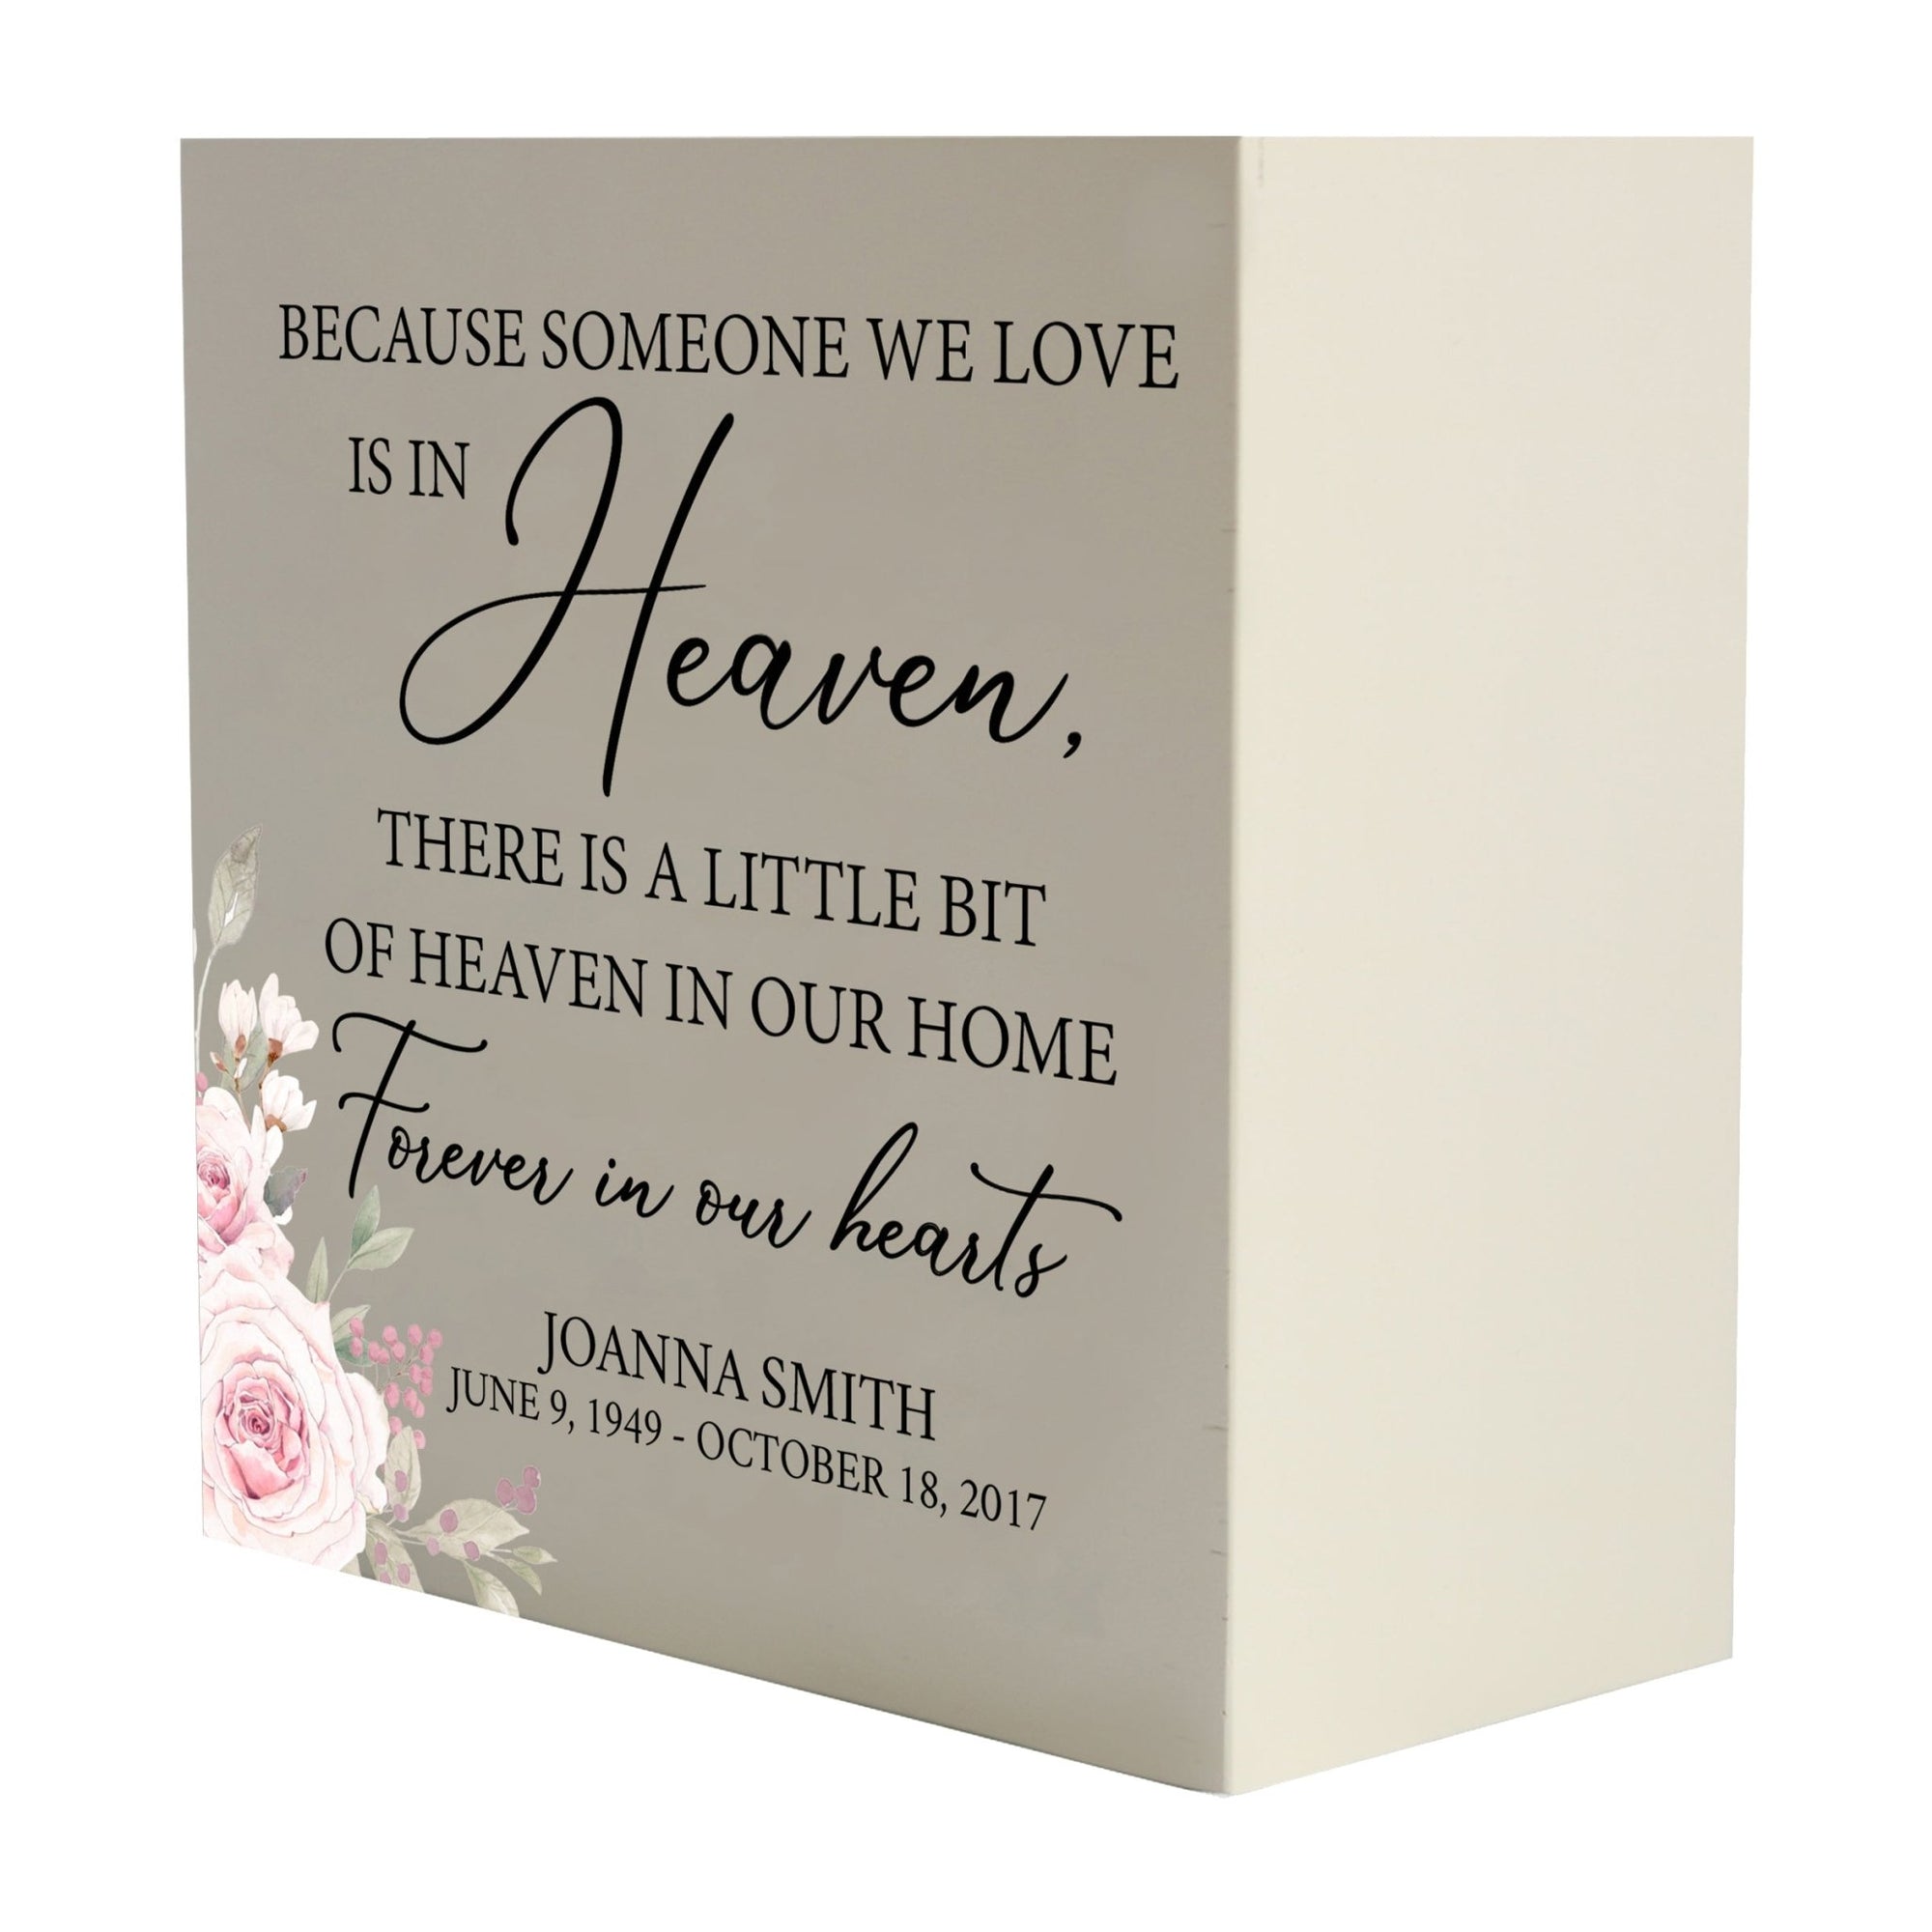 Personalized Modern Inspirational Memorial Wooden Shadow Box and Urn 6x6 holds 53 cu in of Human Ashes - Because Someone We Love (Ivory) - LifeSong Milestones